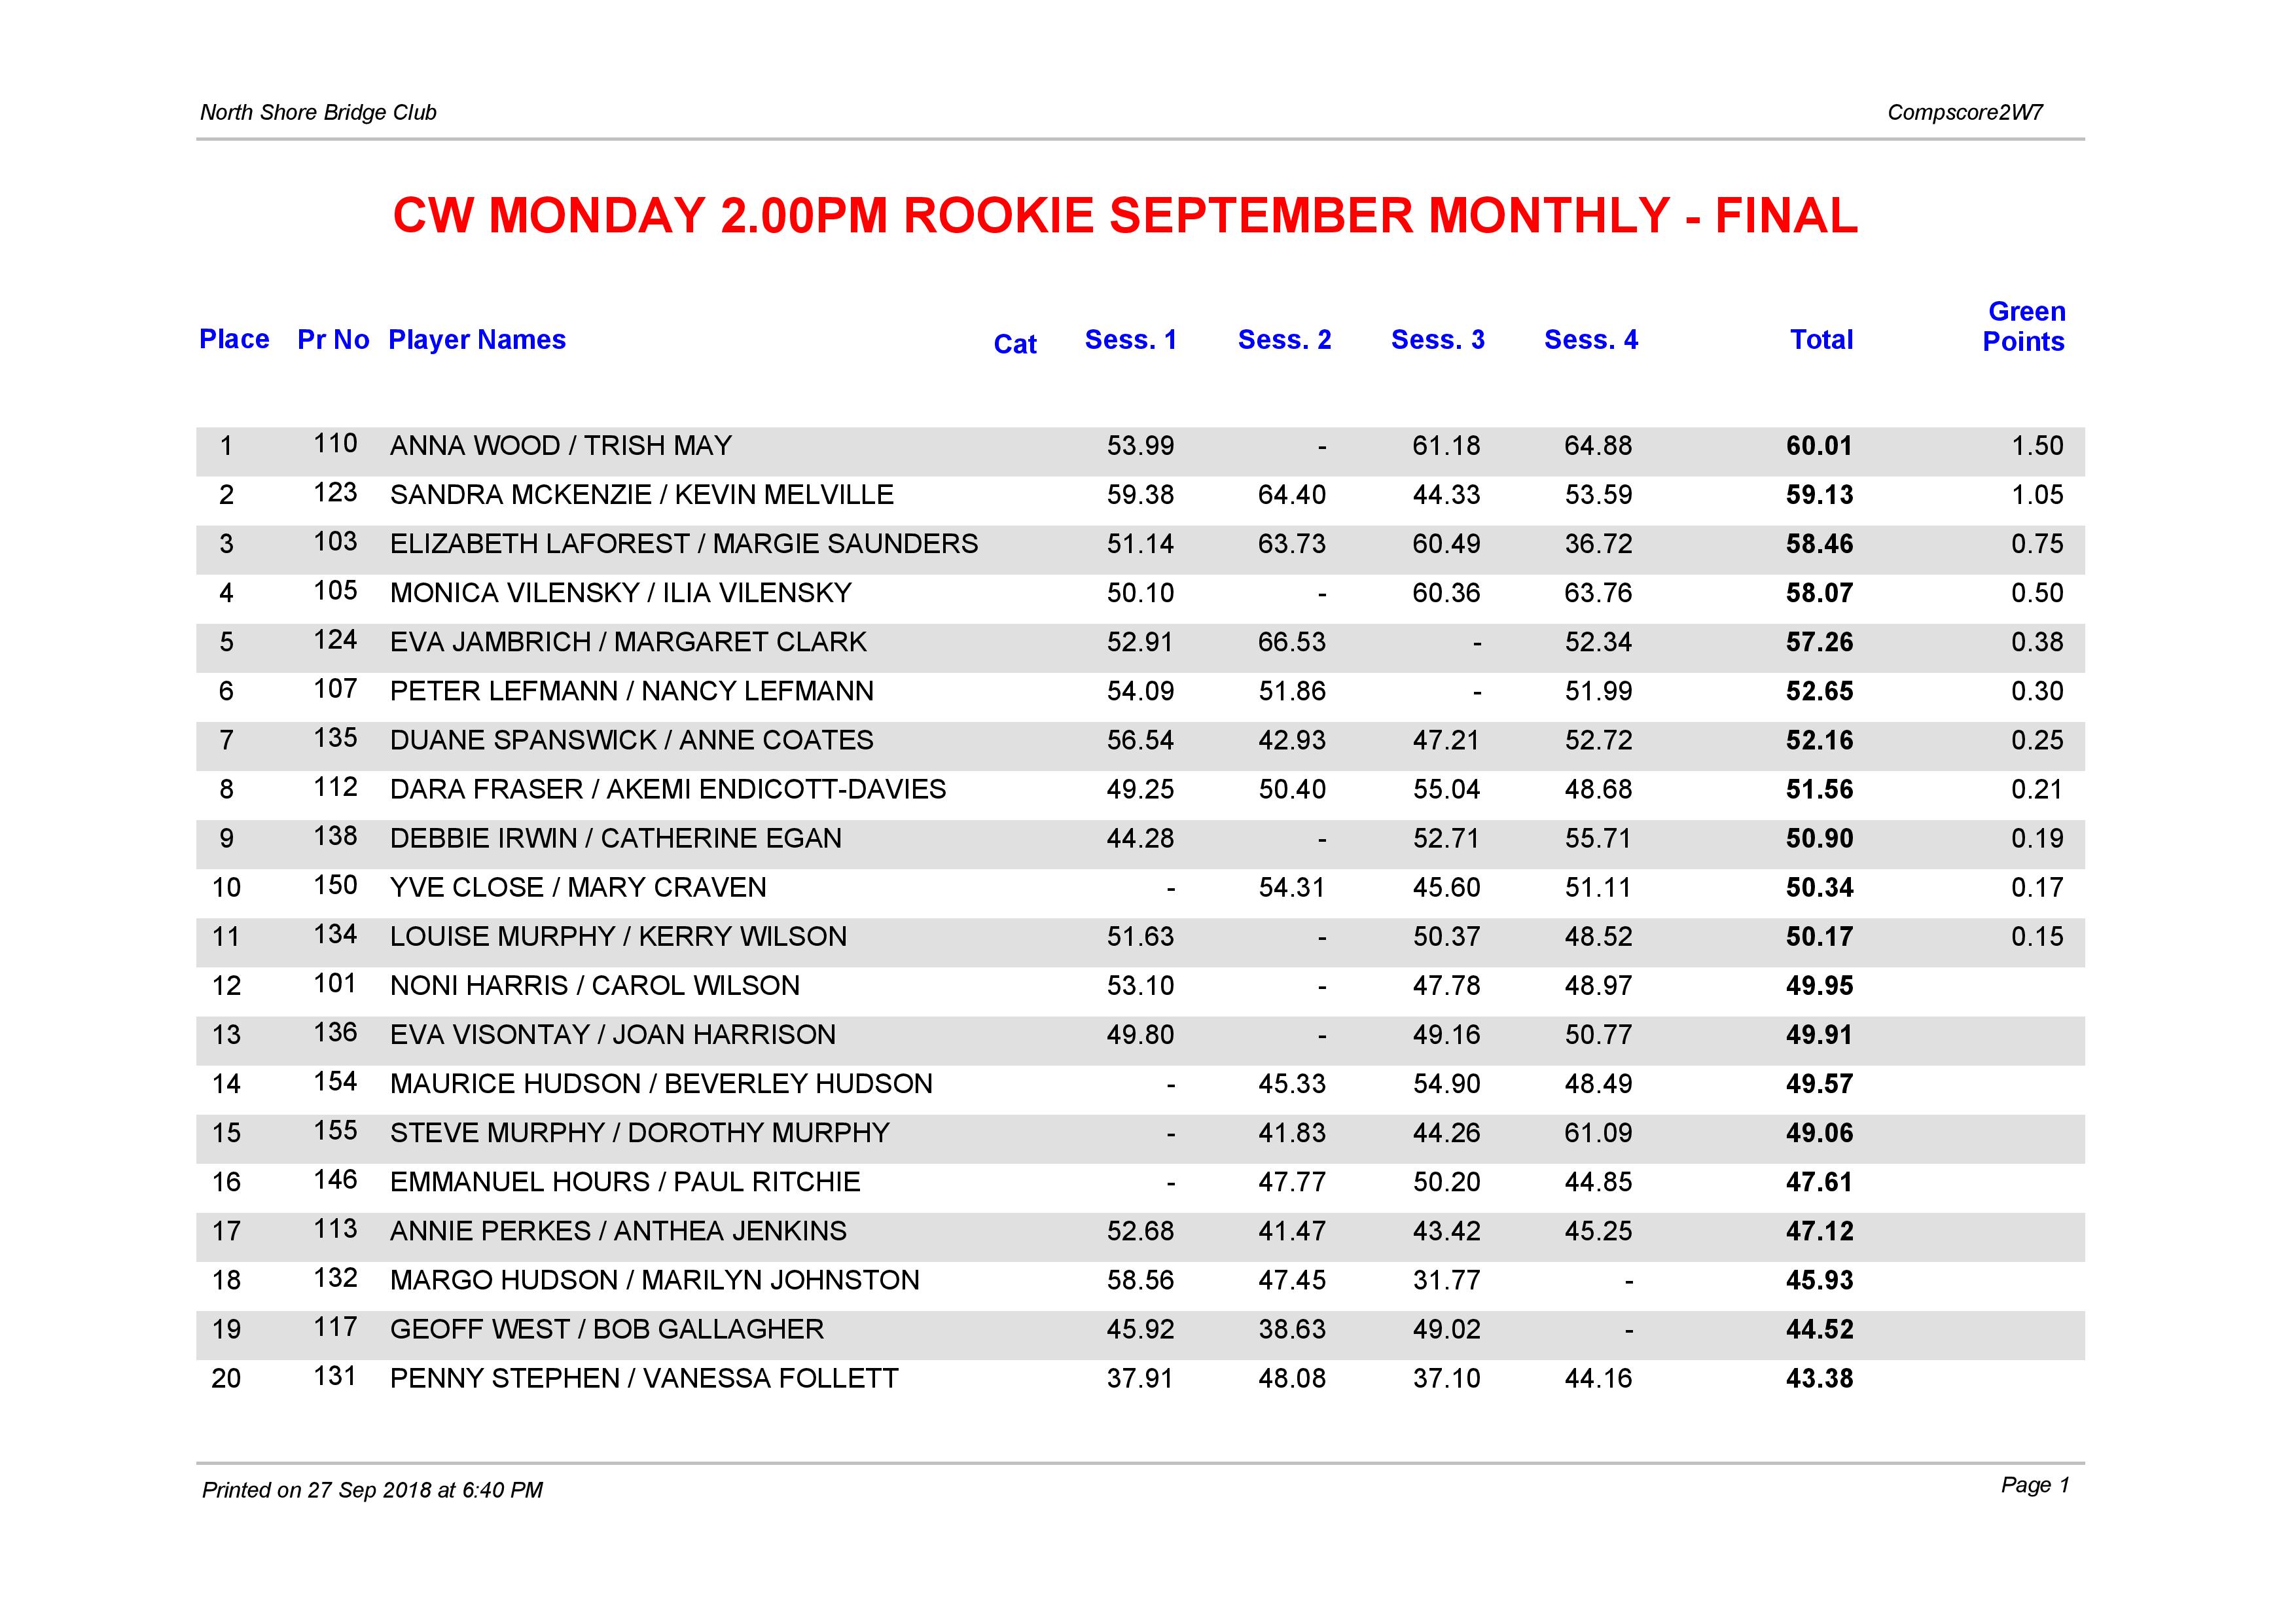 CW Monday 2.00pm Rookie September Winners